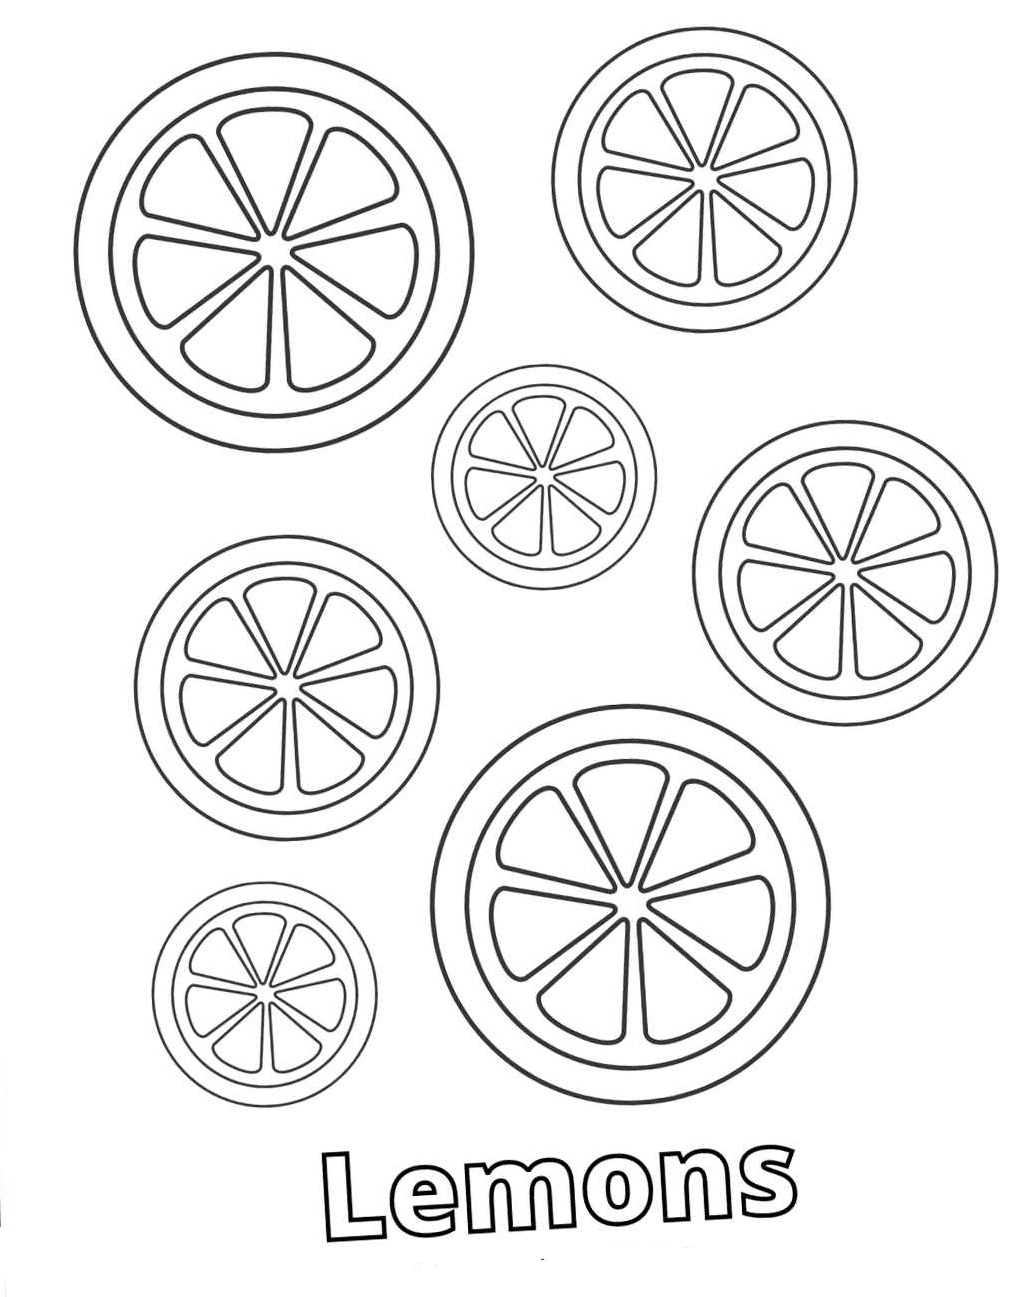 Lemon Coloring Nature Inspired Learning Image Coloring Page